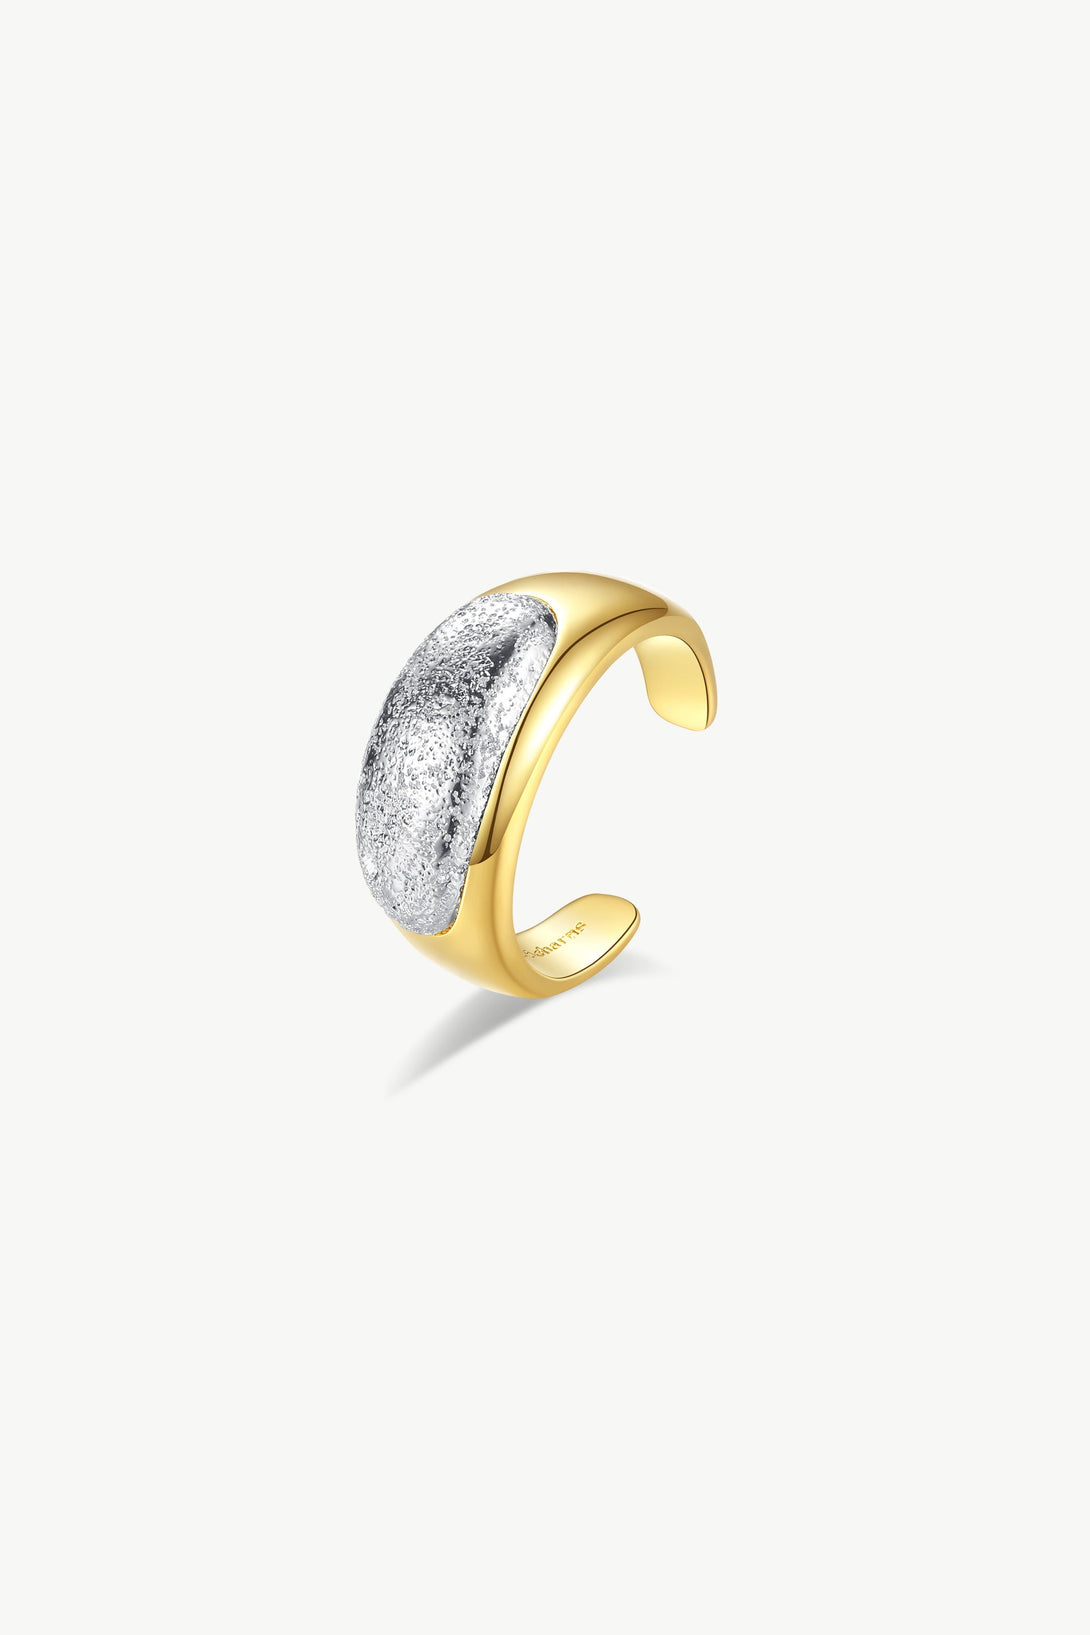 Frosted and Matted Texture Two Tone Ring - Classicharms